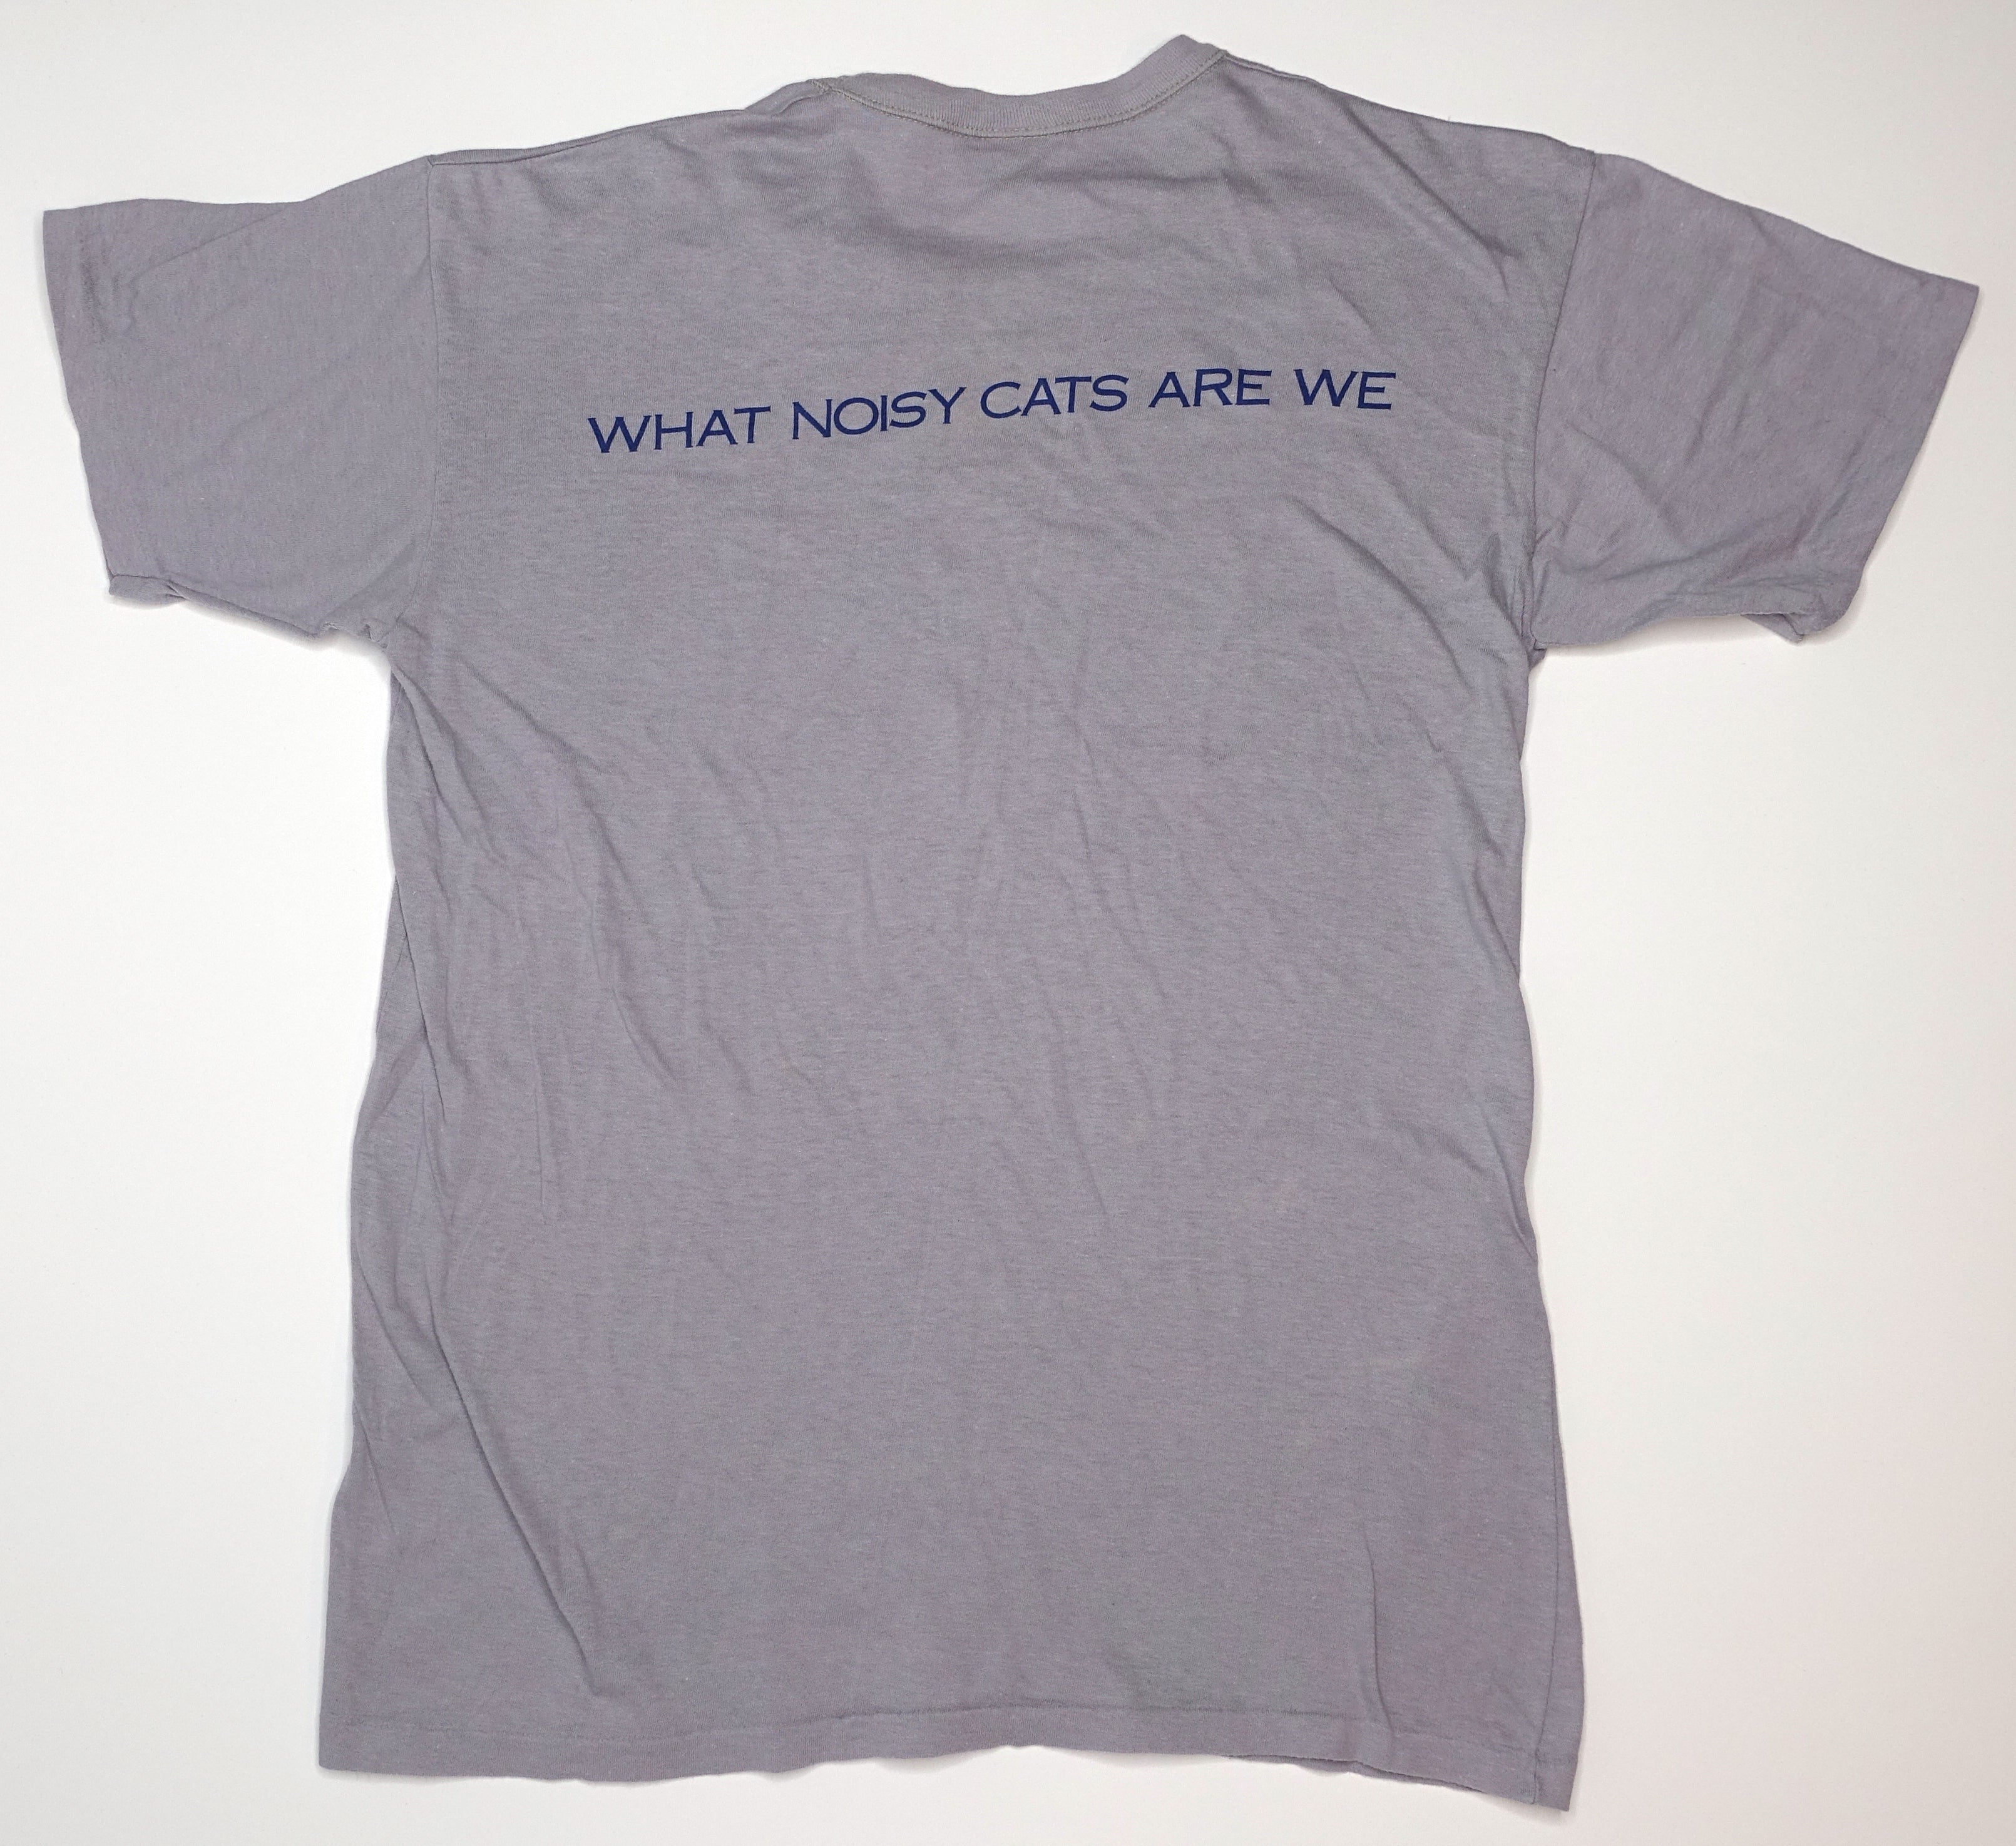 R.E.M. - What Noisy Cats Are We? Tour Shirt Size Large